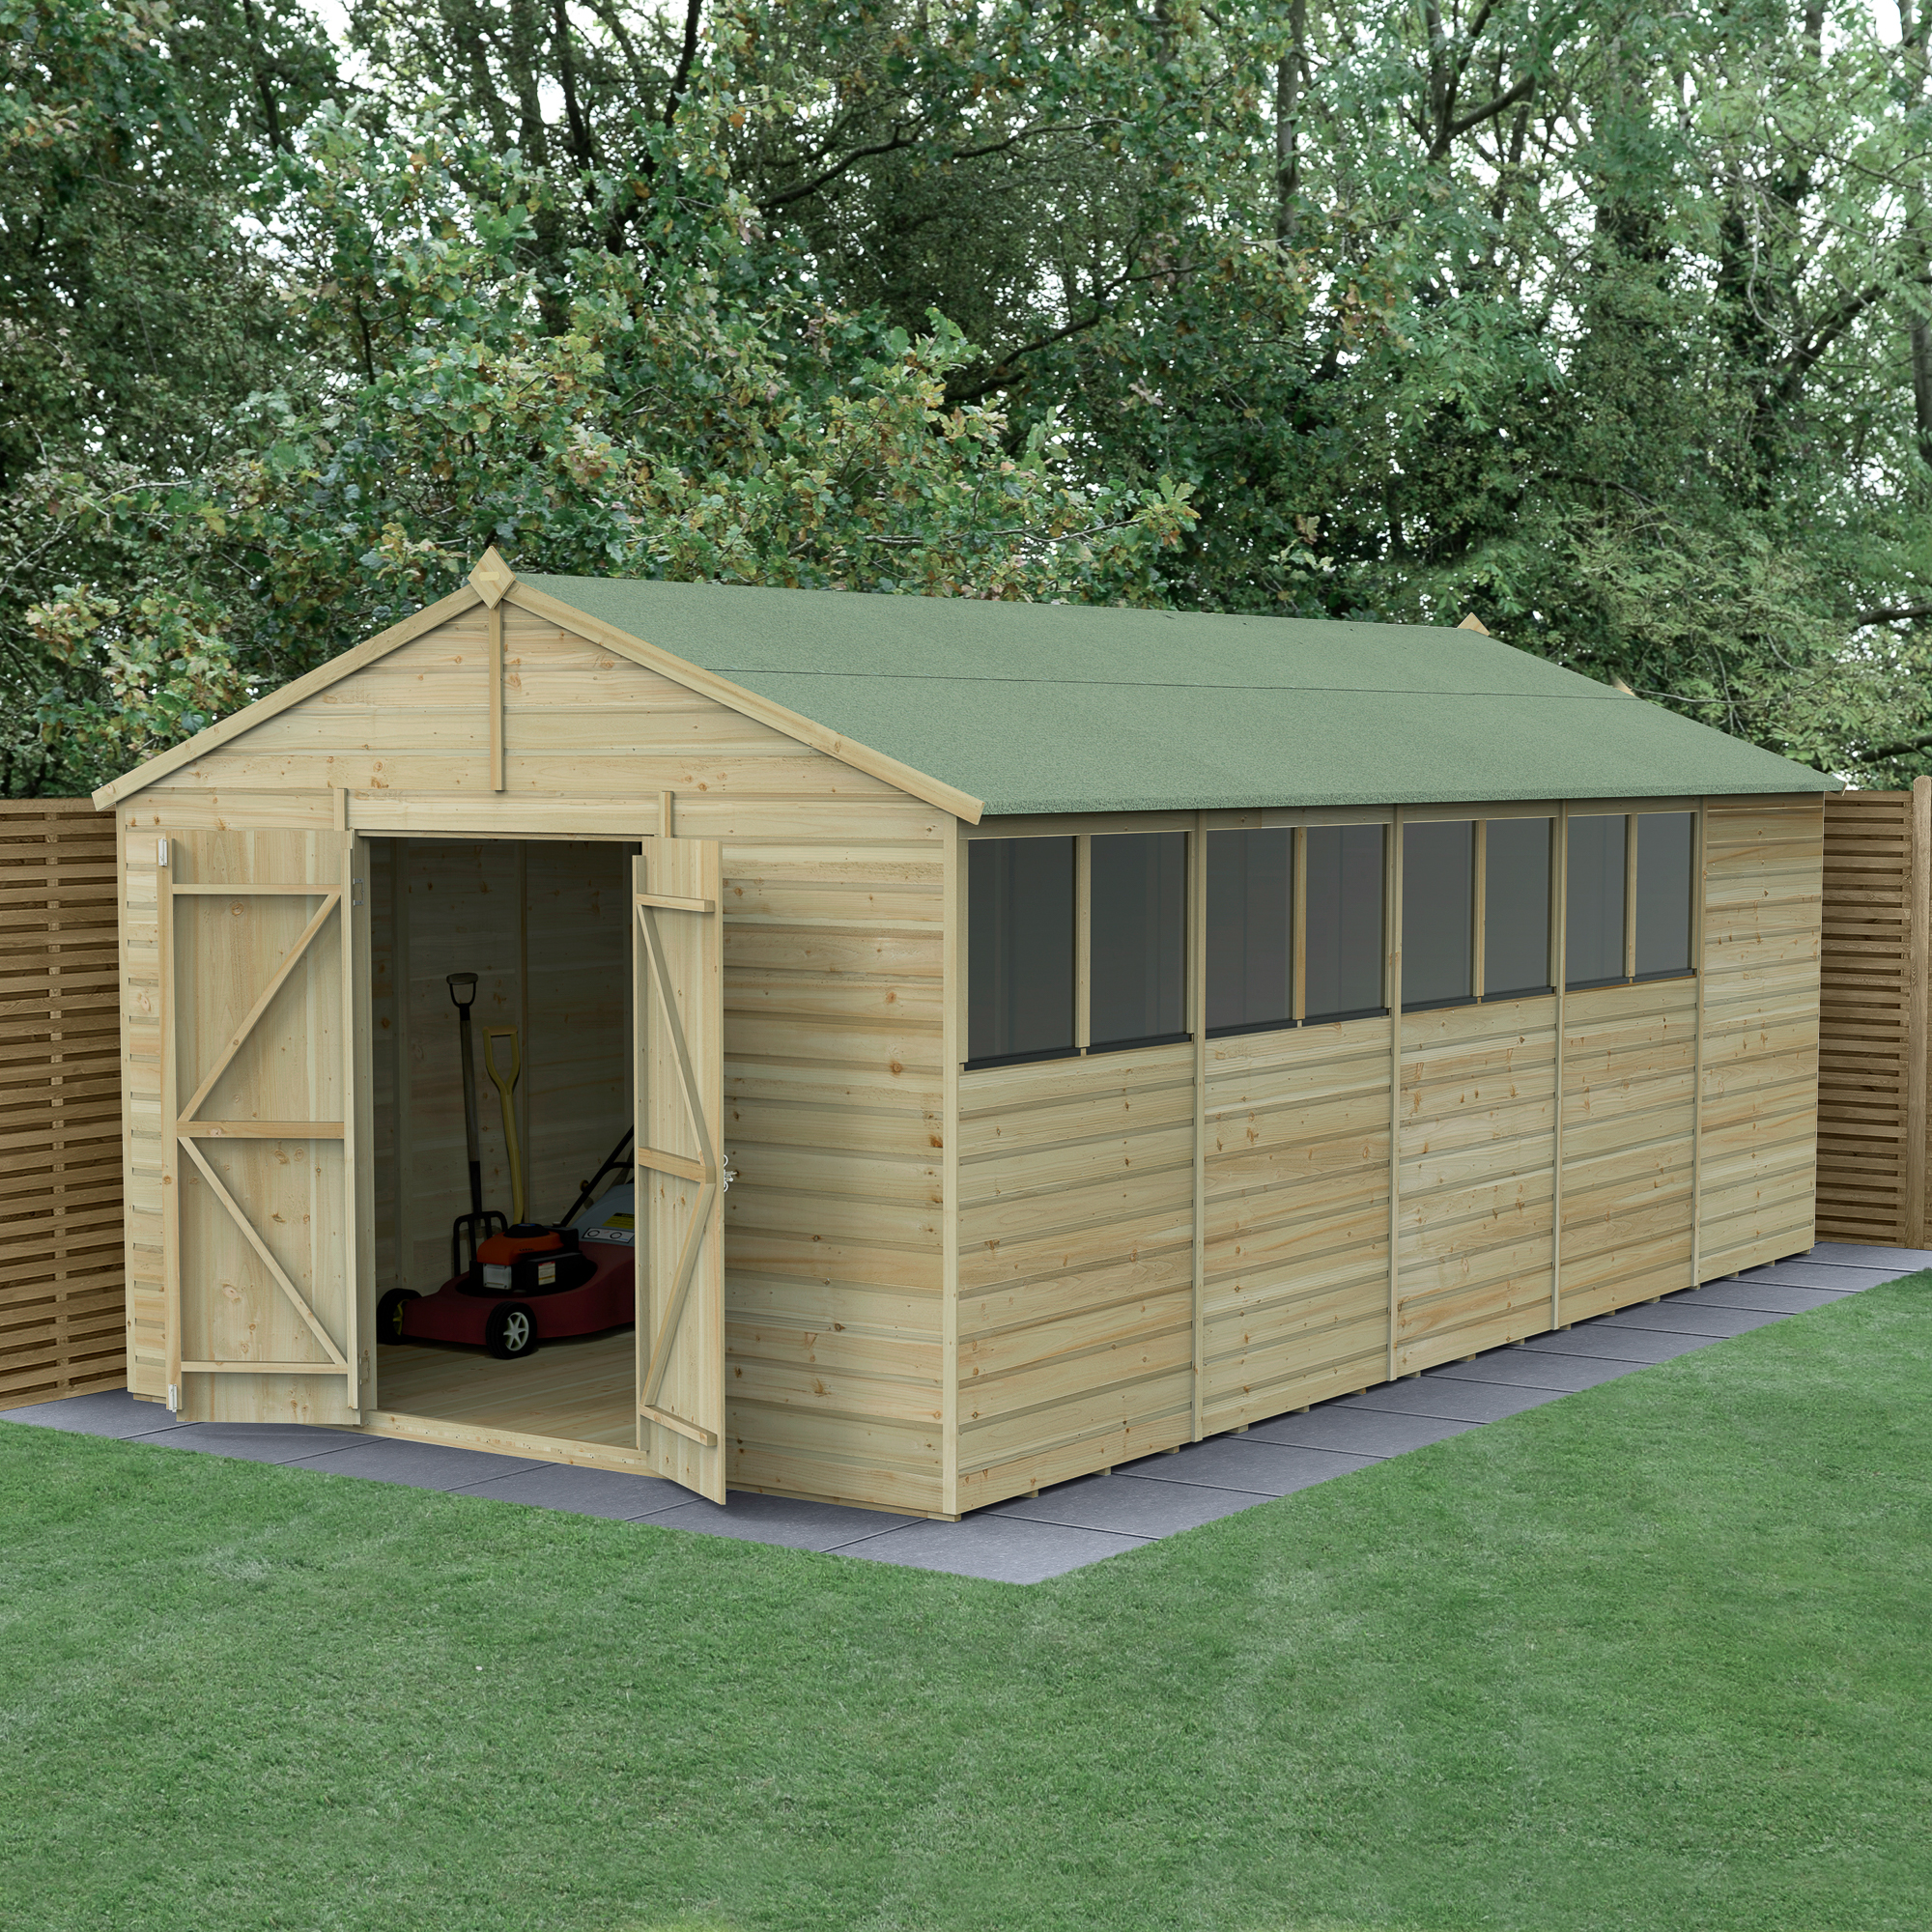 Forest Garden Beckwood 10 x 20ft Apex Shiplap Pressure Treated Double Door Shed